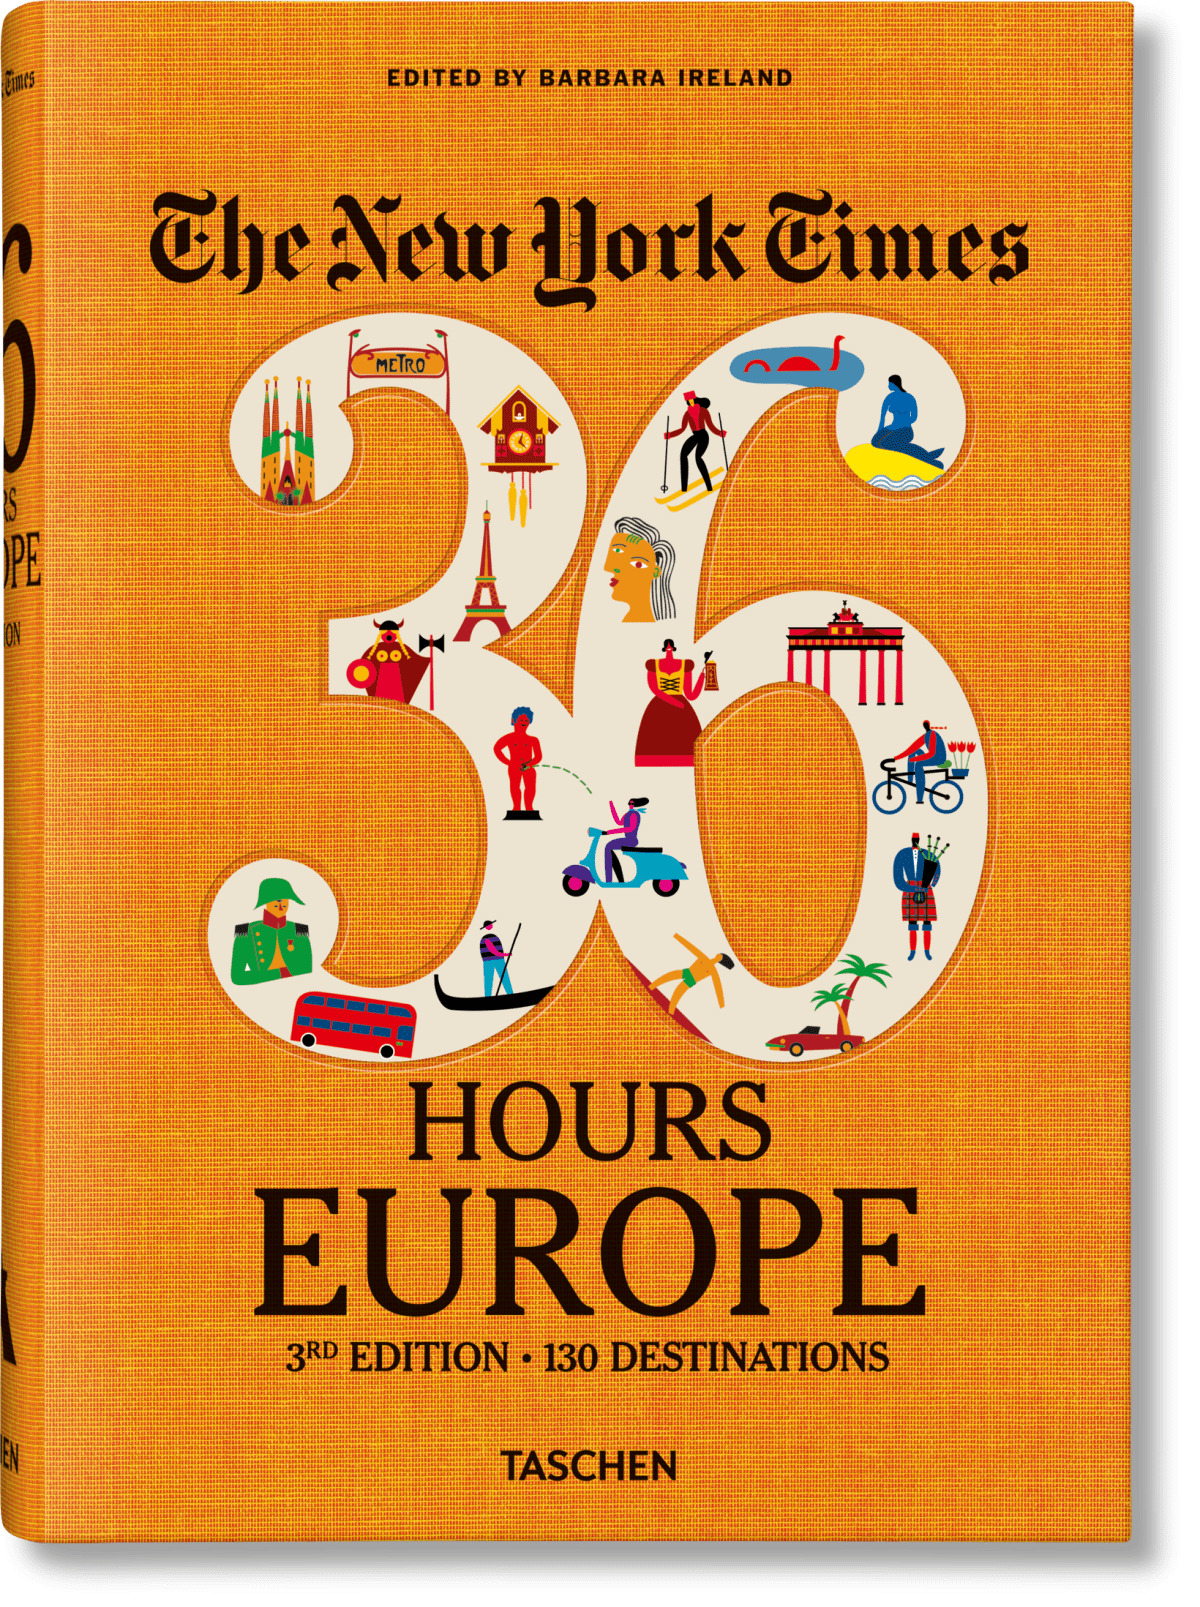 The New York Times 36 Hours. Europa. 3. Auflage